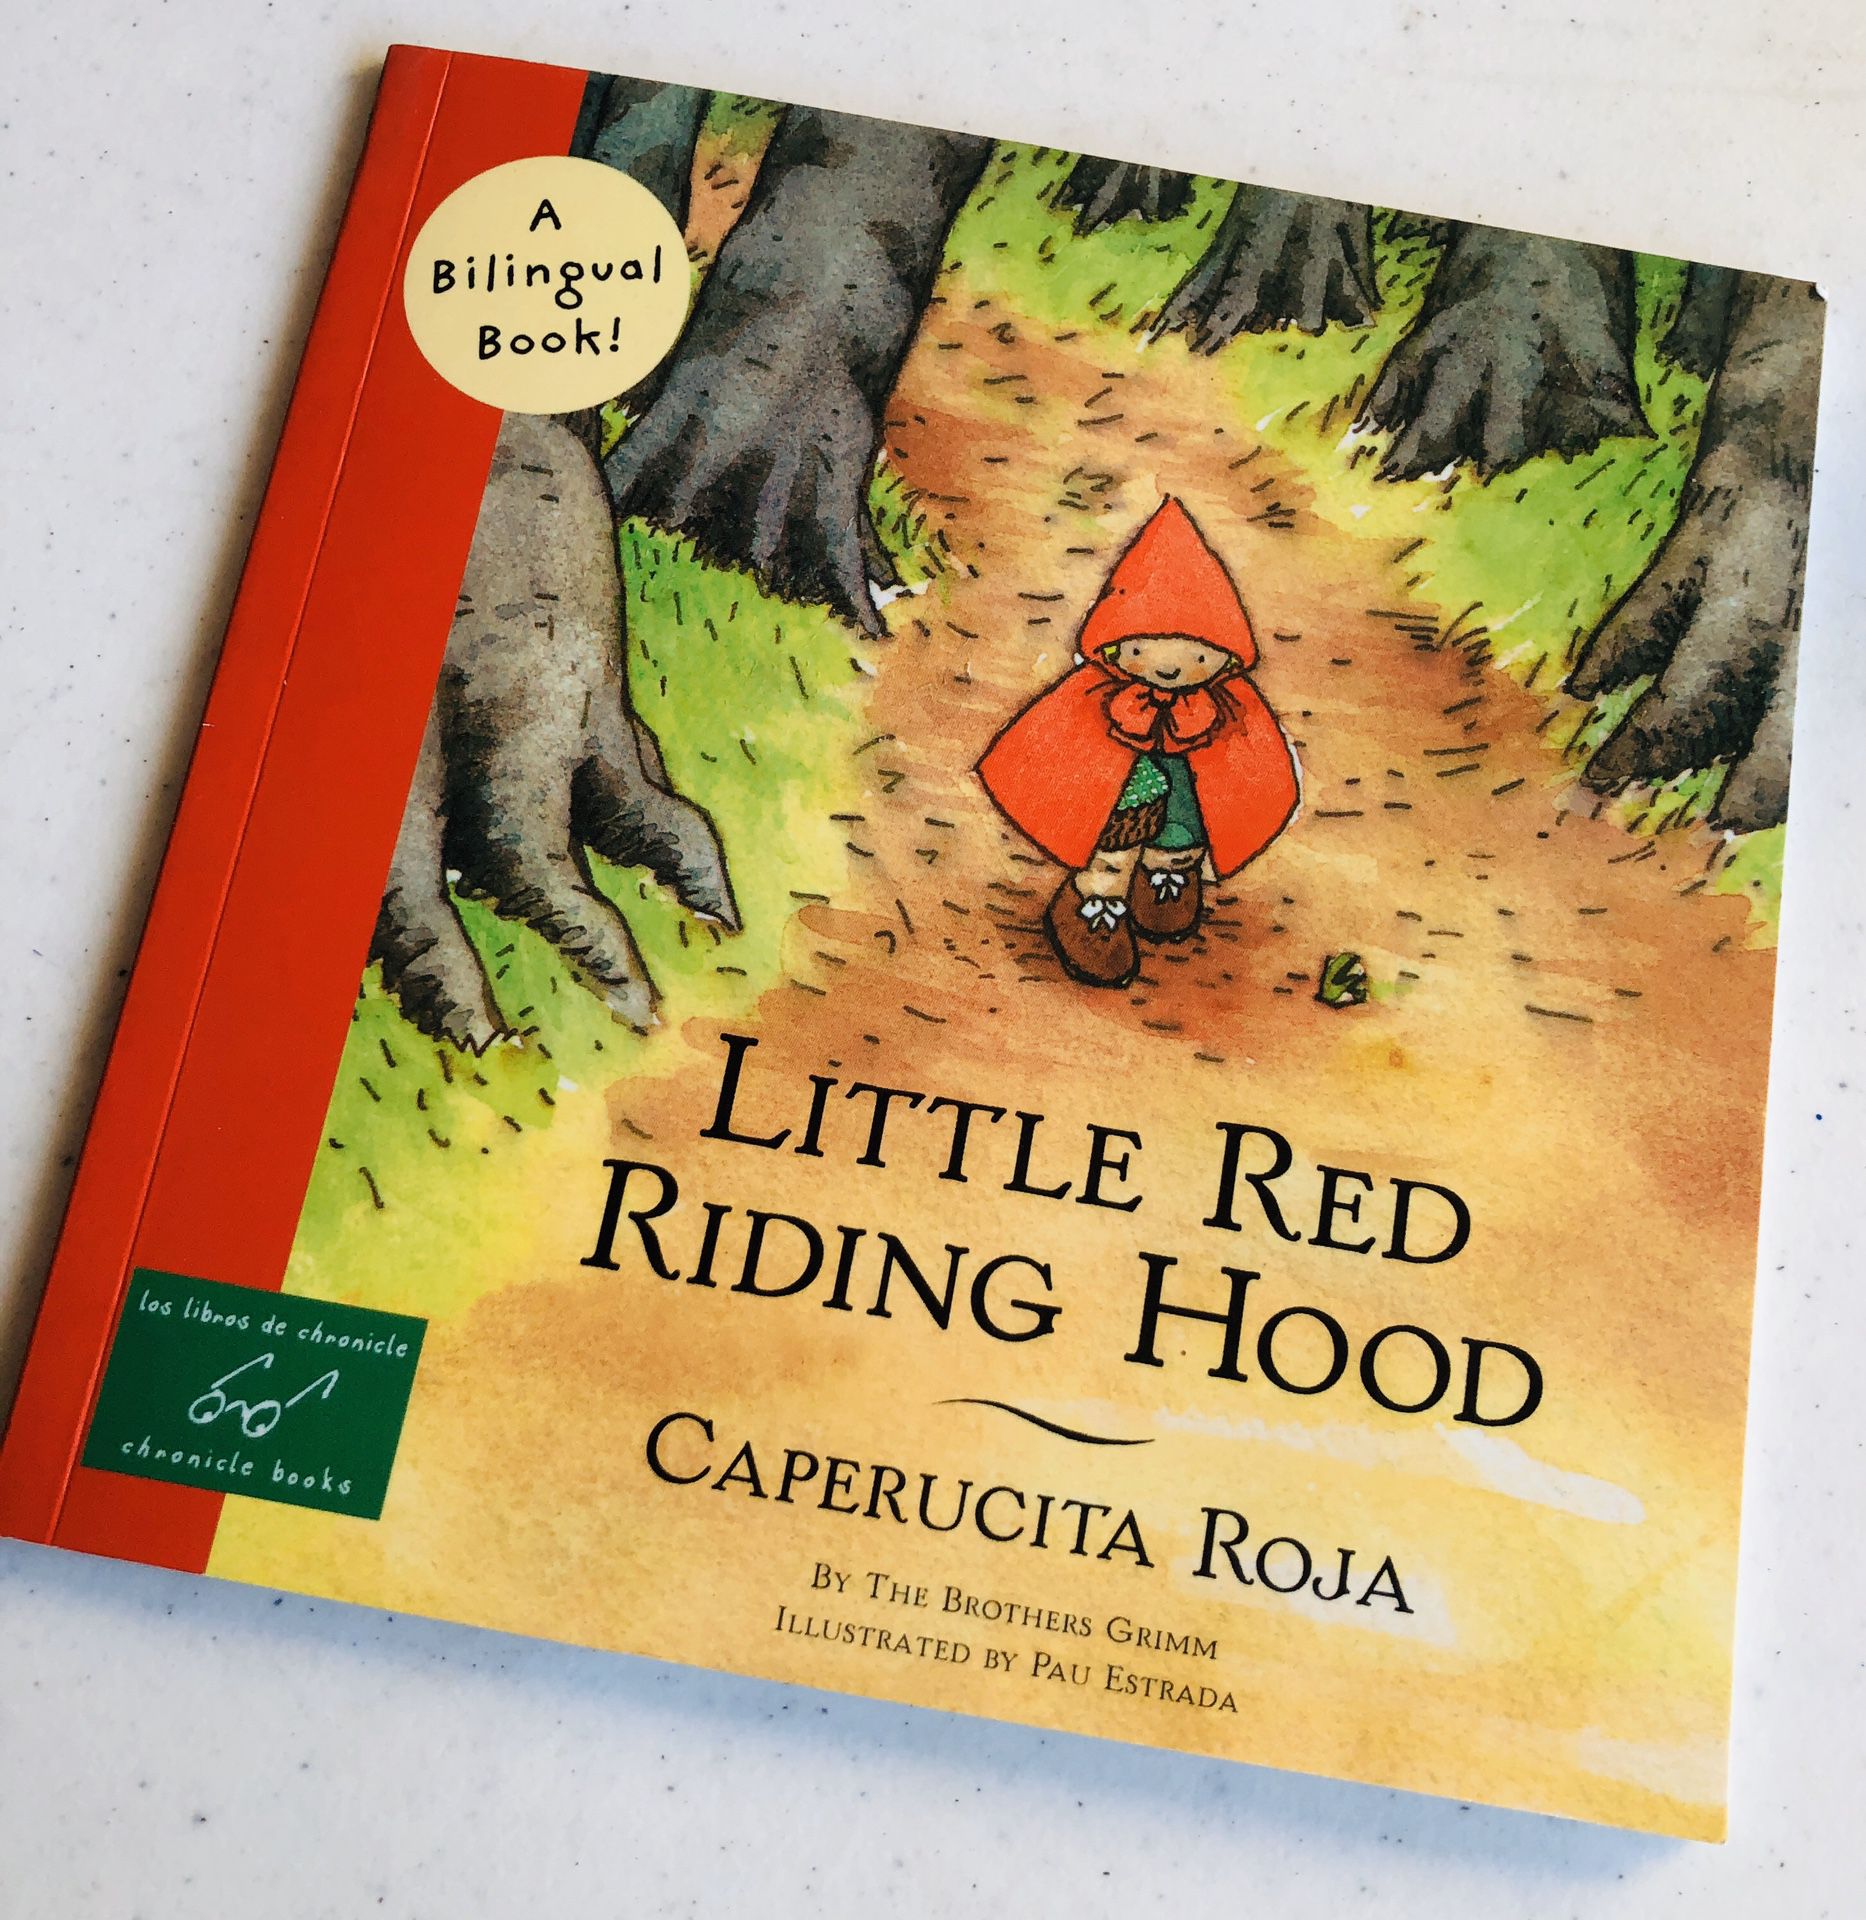 A BILINGUAL BOOK 📖 Little Red Riding Hood